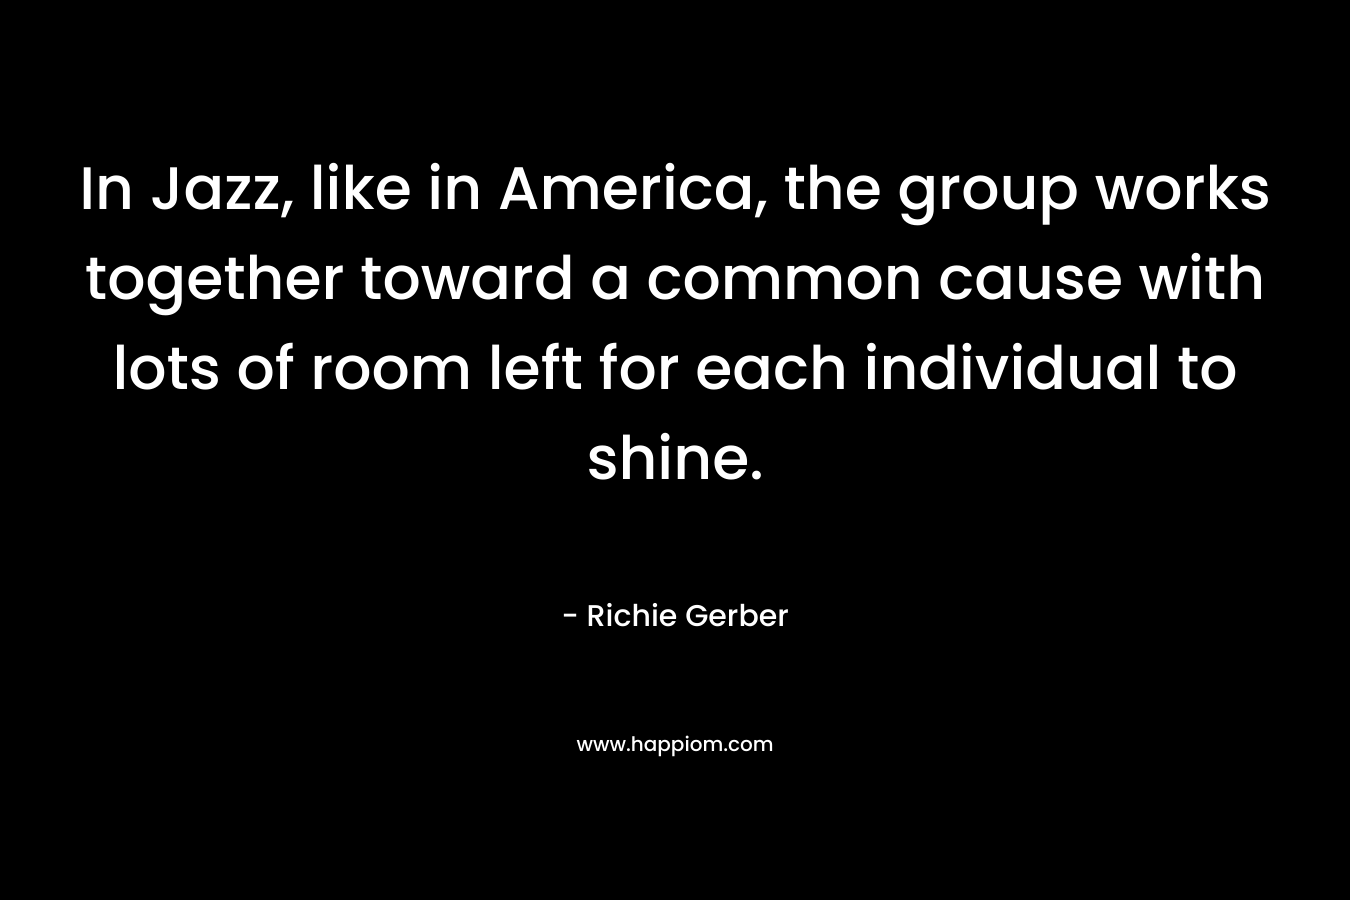 In Jazz, like in America, the group works together toward a common cause with lots of room left for each individual to shine. – Richie Gerber